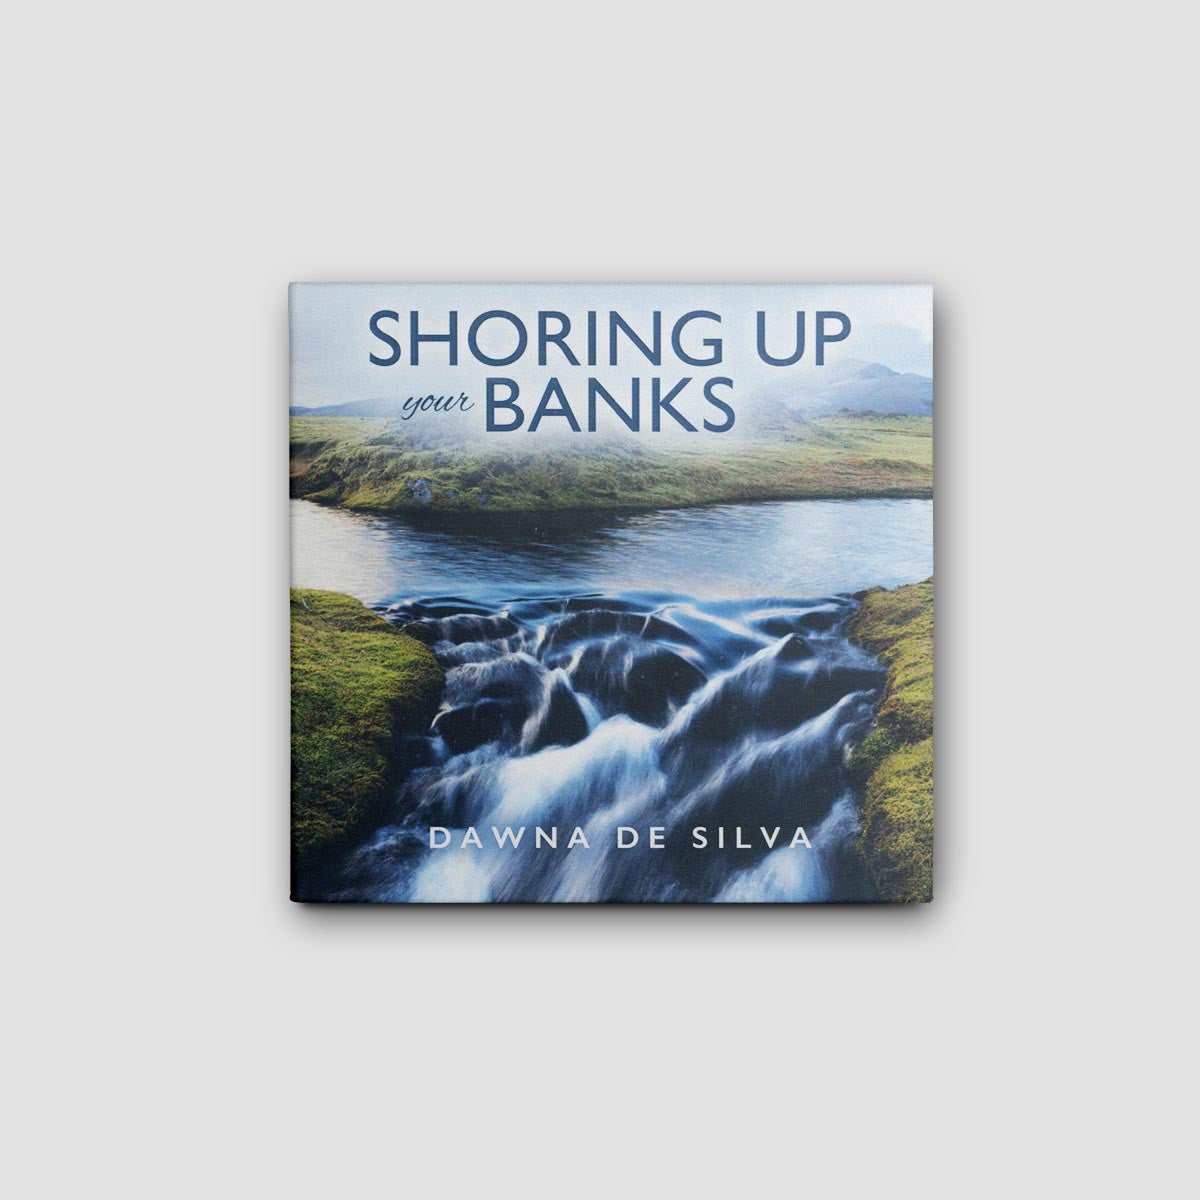 Shoring Up Your Banks